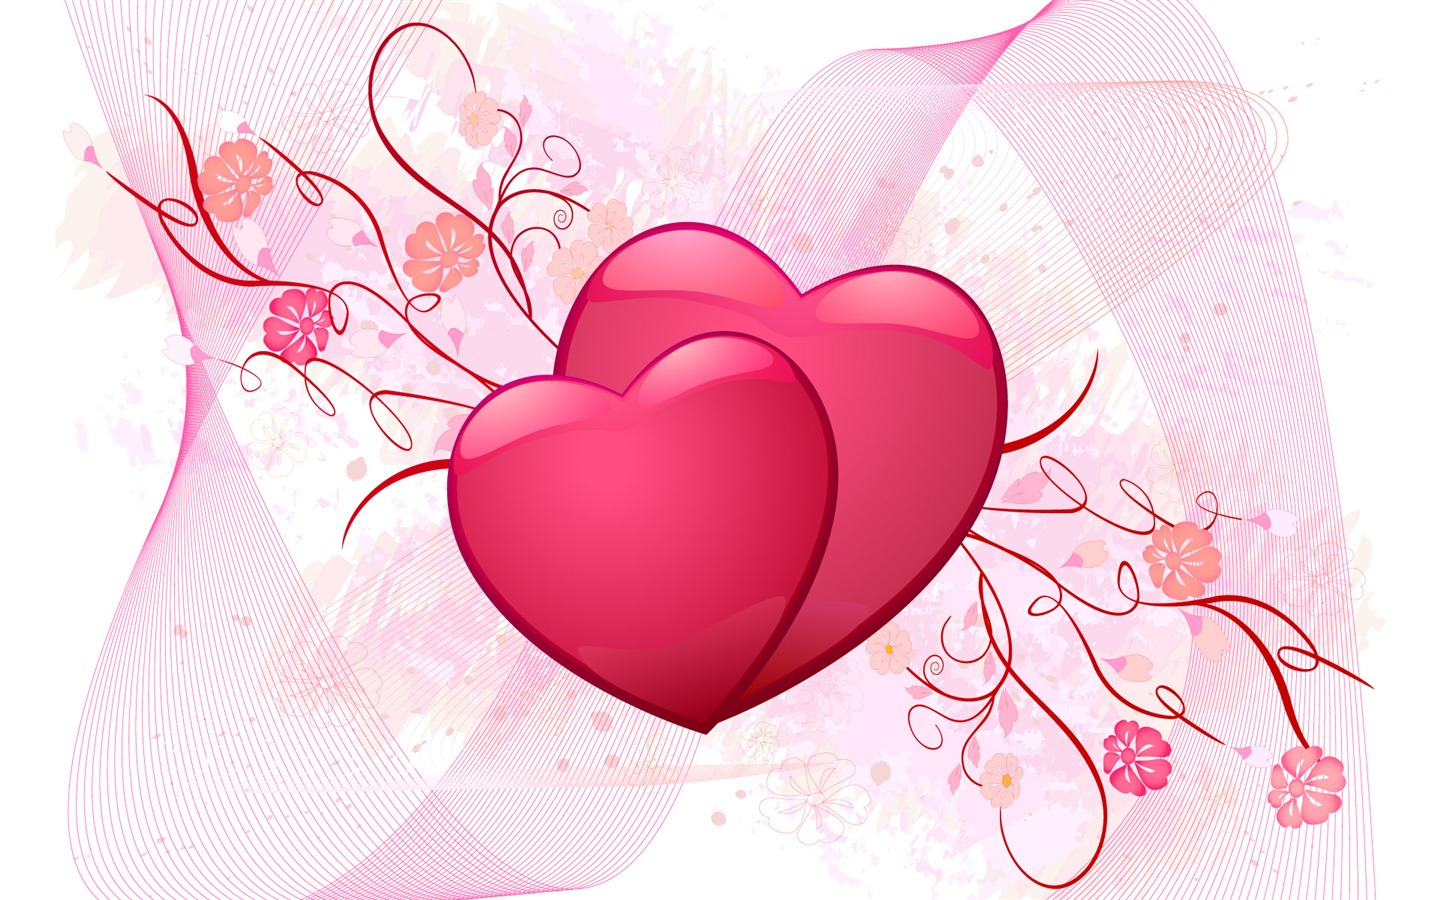 Valentine's Day Love Theme Wallpapers #24 - 1440x900